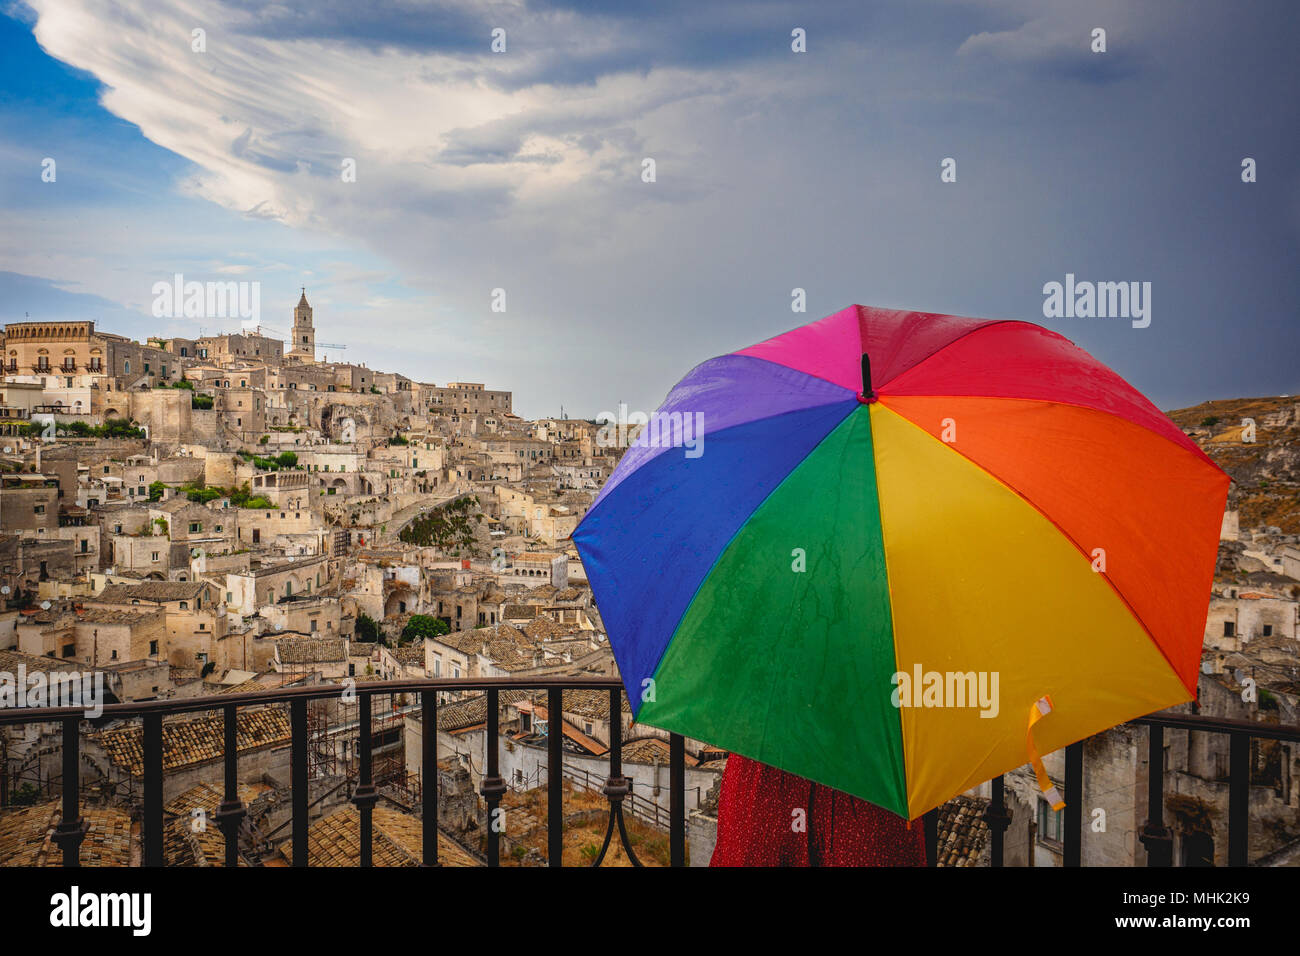 Matera (Italy), September 2017. Tourist with a rainbow umbrella at the belvedere over the ancient town called 'Sassi di Matera'. Landscape format. Stock Photo